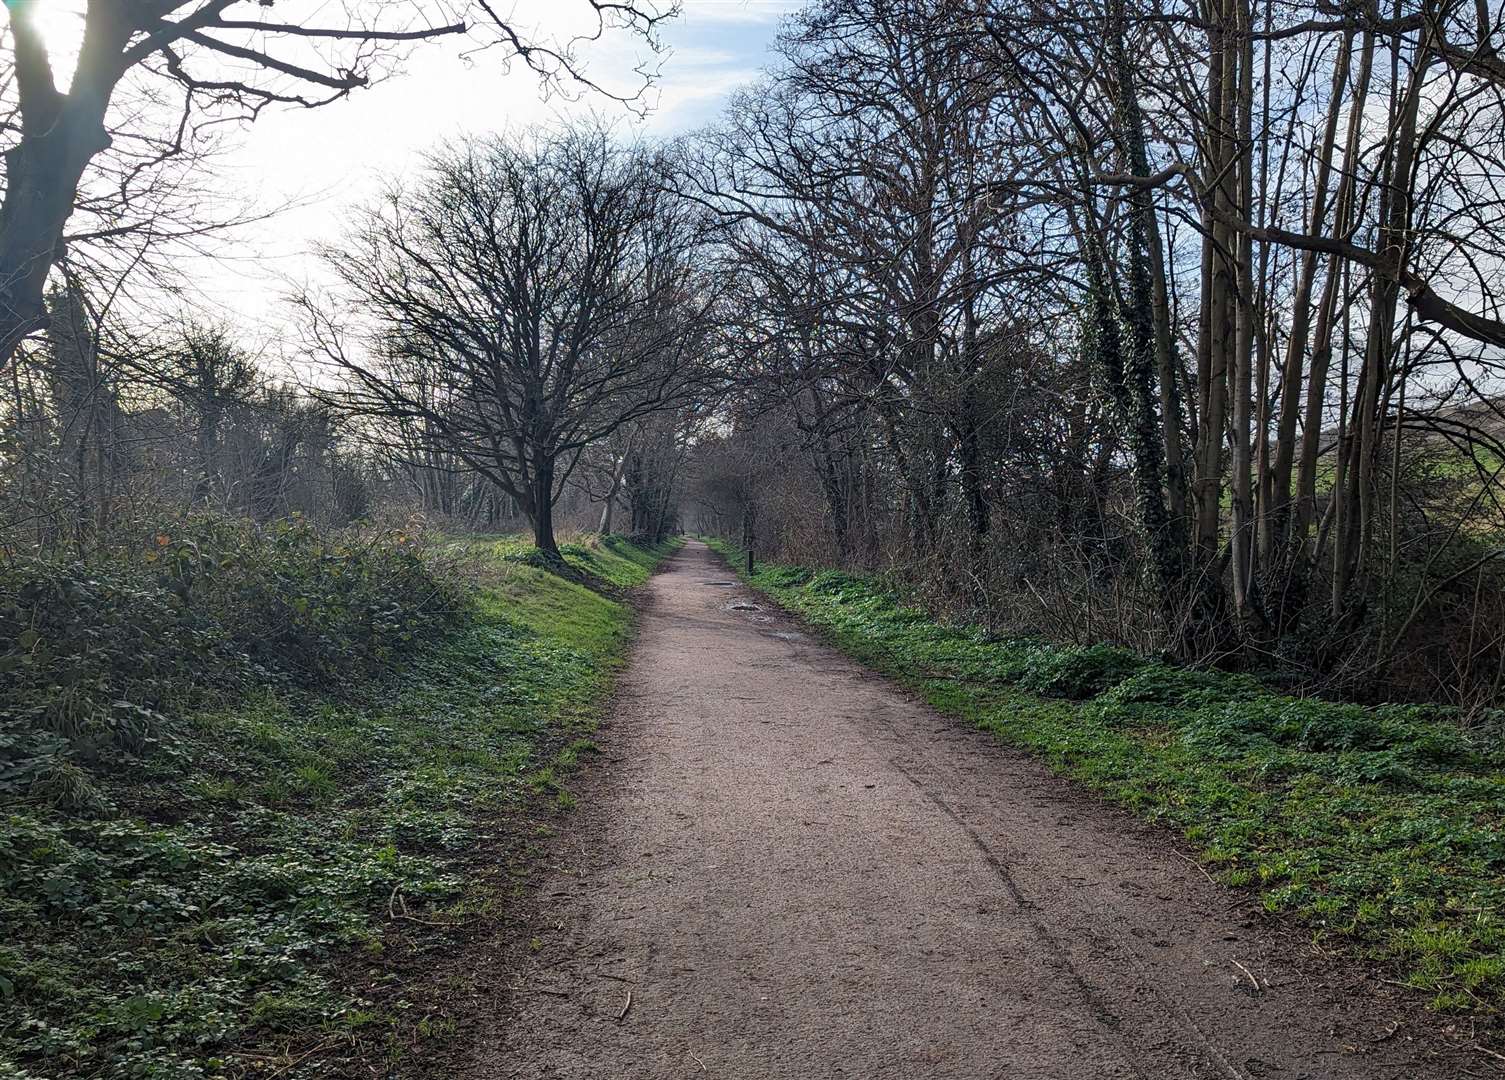 The path leads alongside the Royal Military Canal from Hythe